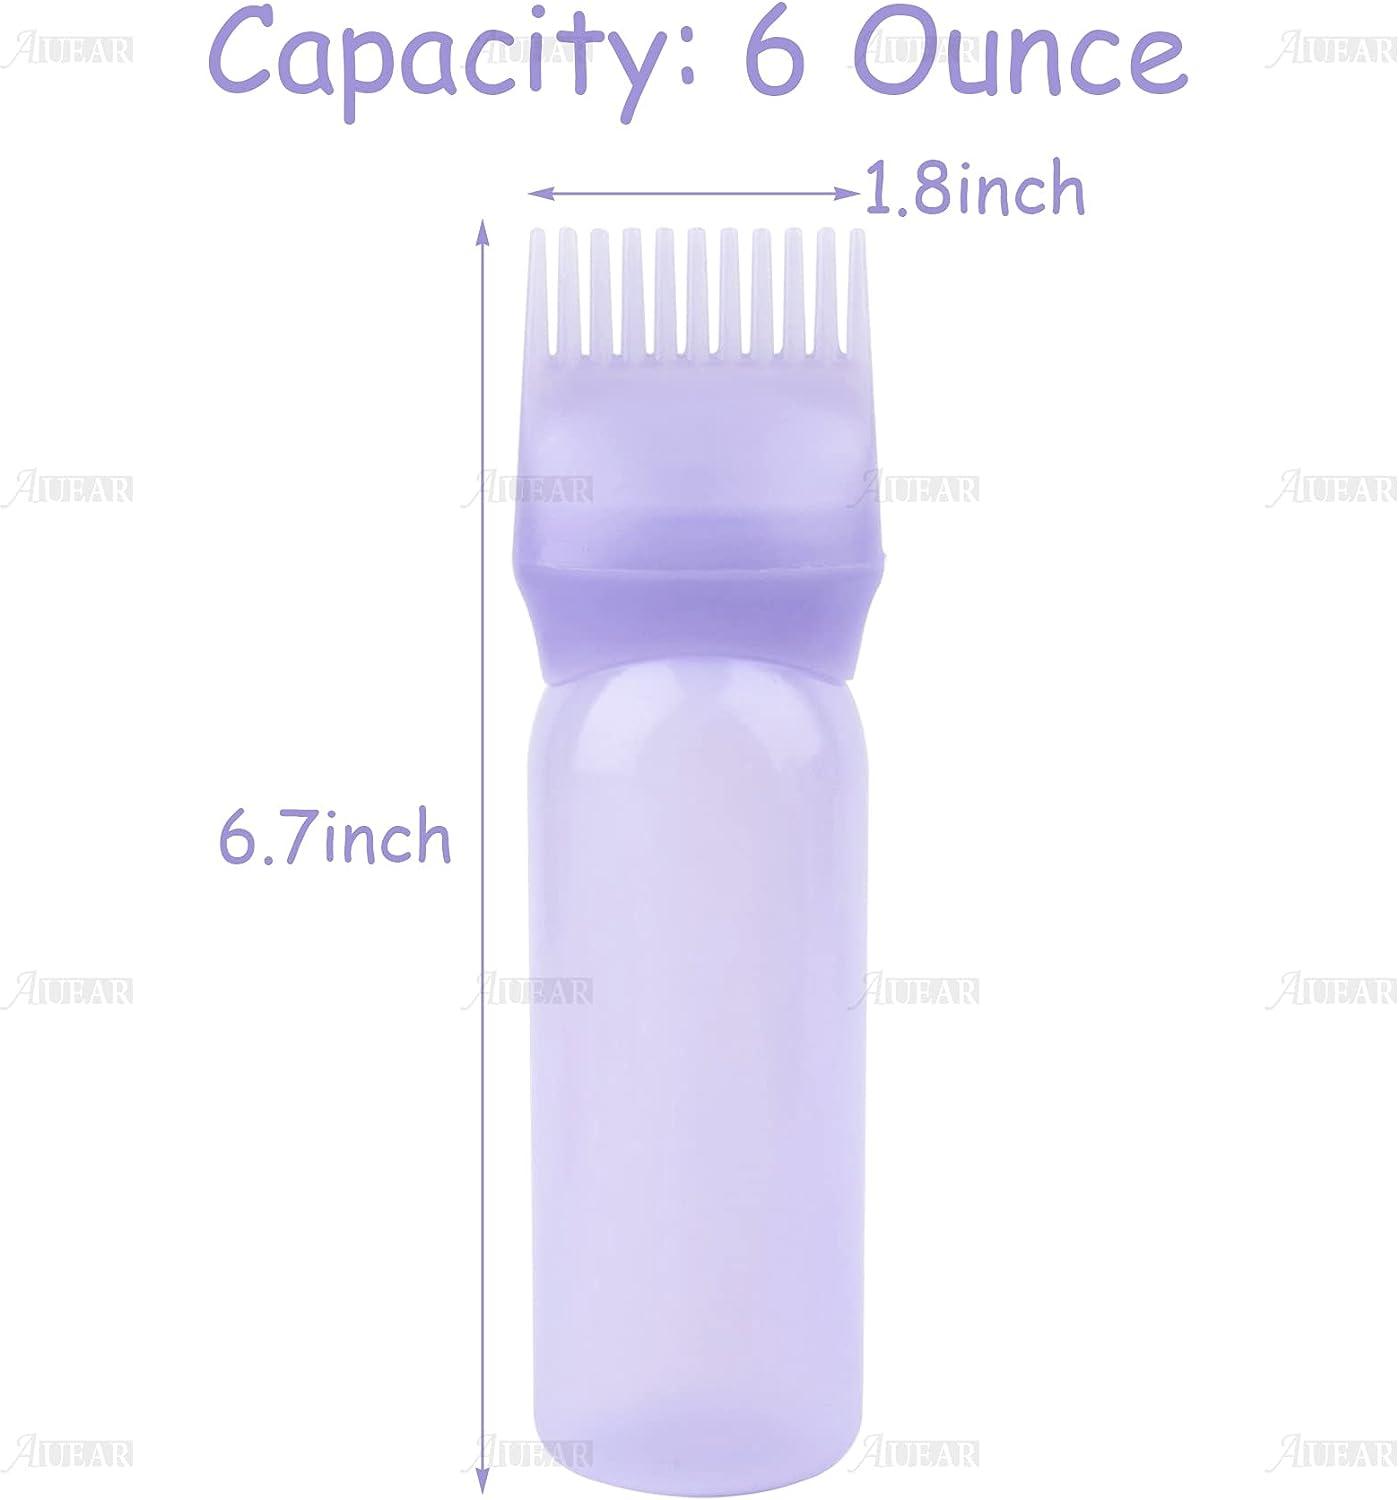 Root Comb Applicator Bottle, 6 Ounce, Oil Applicator for Hair Dye, Bottle  Applicator Brush with Graduated Scale, Purple, 2 Pack